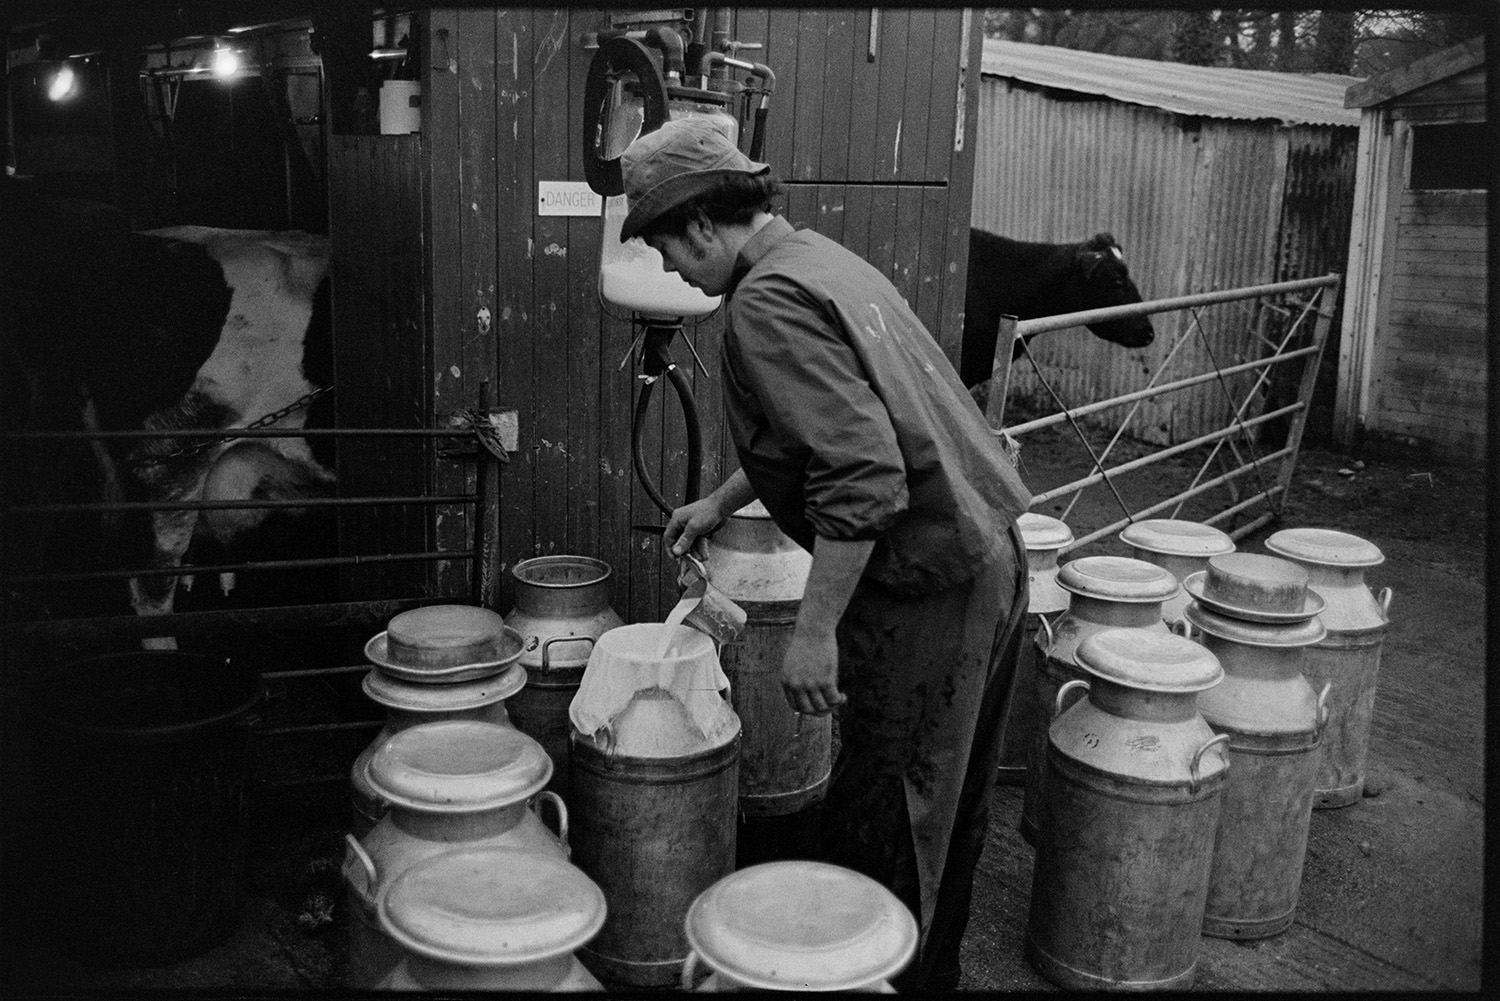 A man, possibly David Ward or Graham Ward, pouring milk from a metal jug through a cloth filter into a milk churn outside the milking shed at Parsonage Farm, Iddesleigh. Cows are being milked inside the shed.